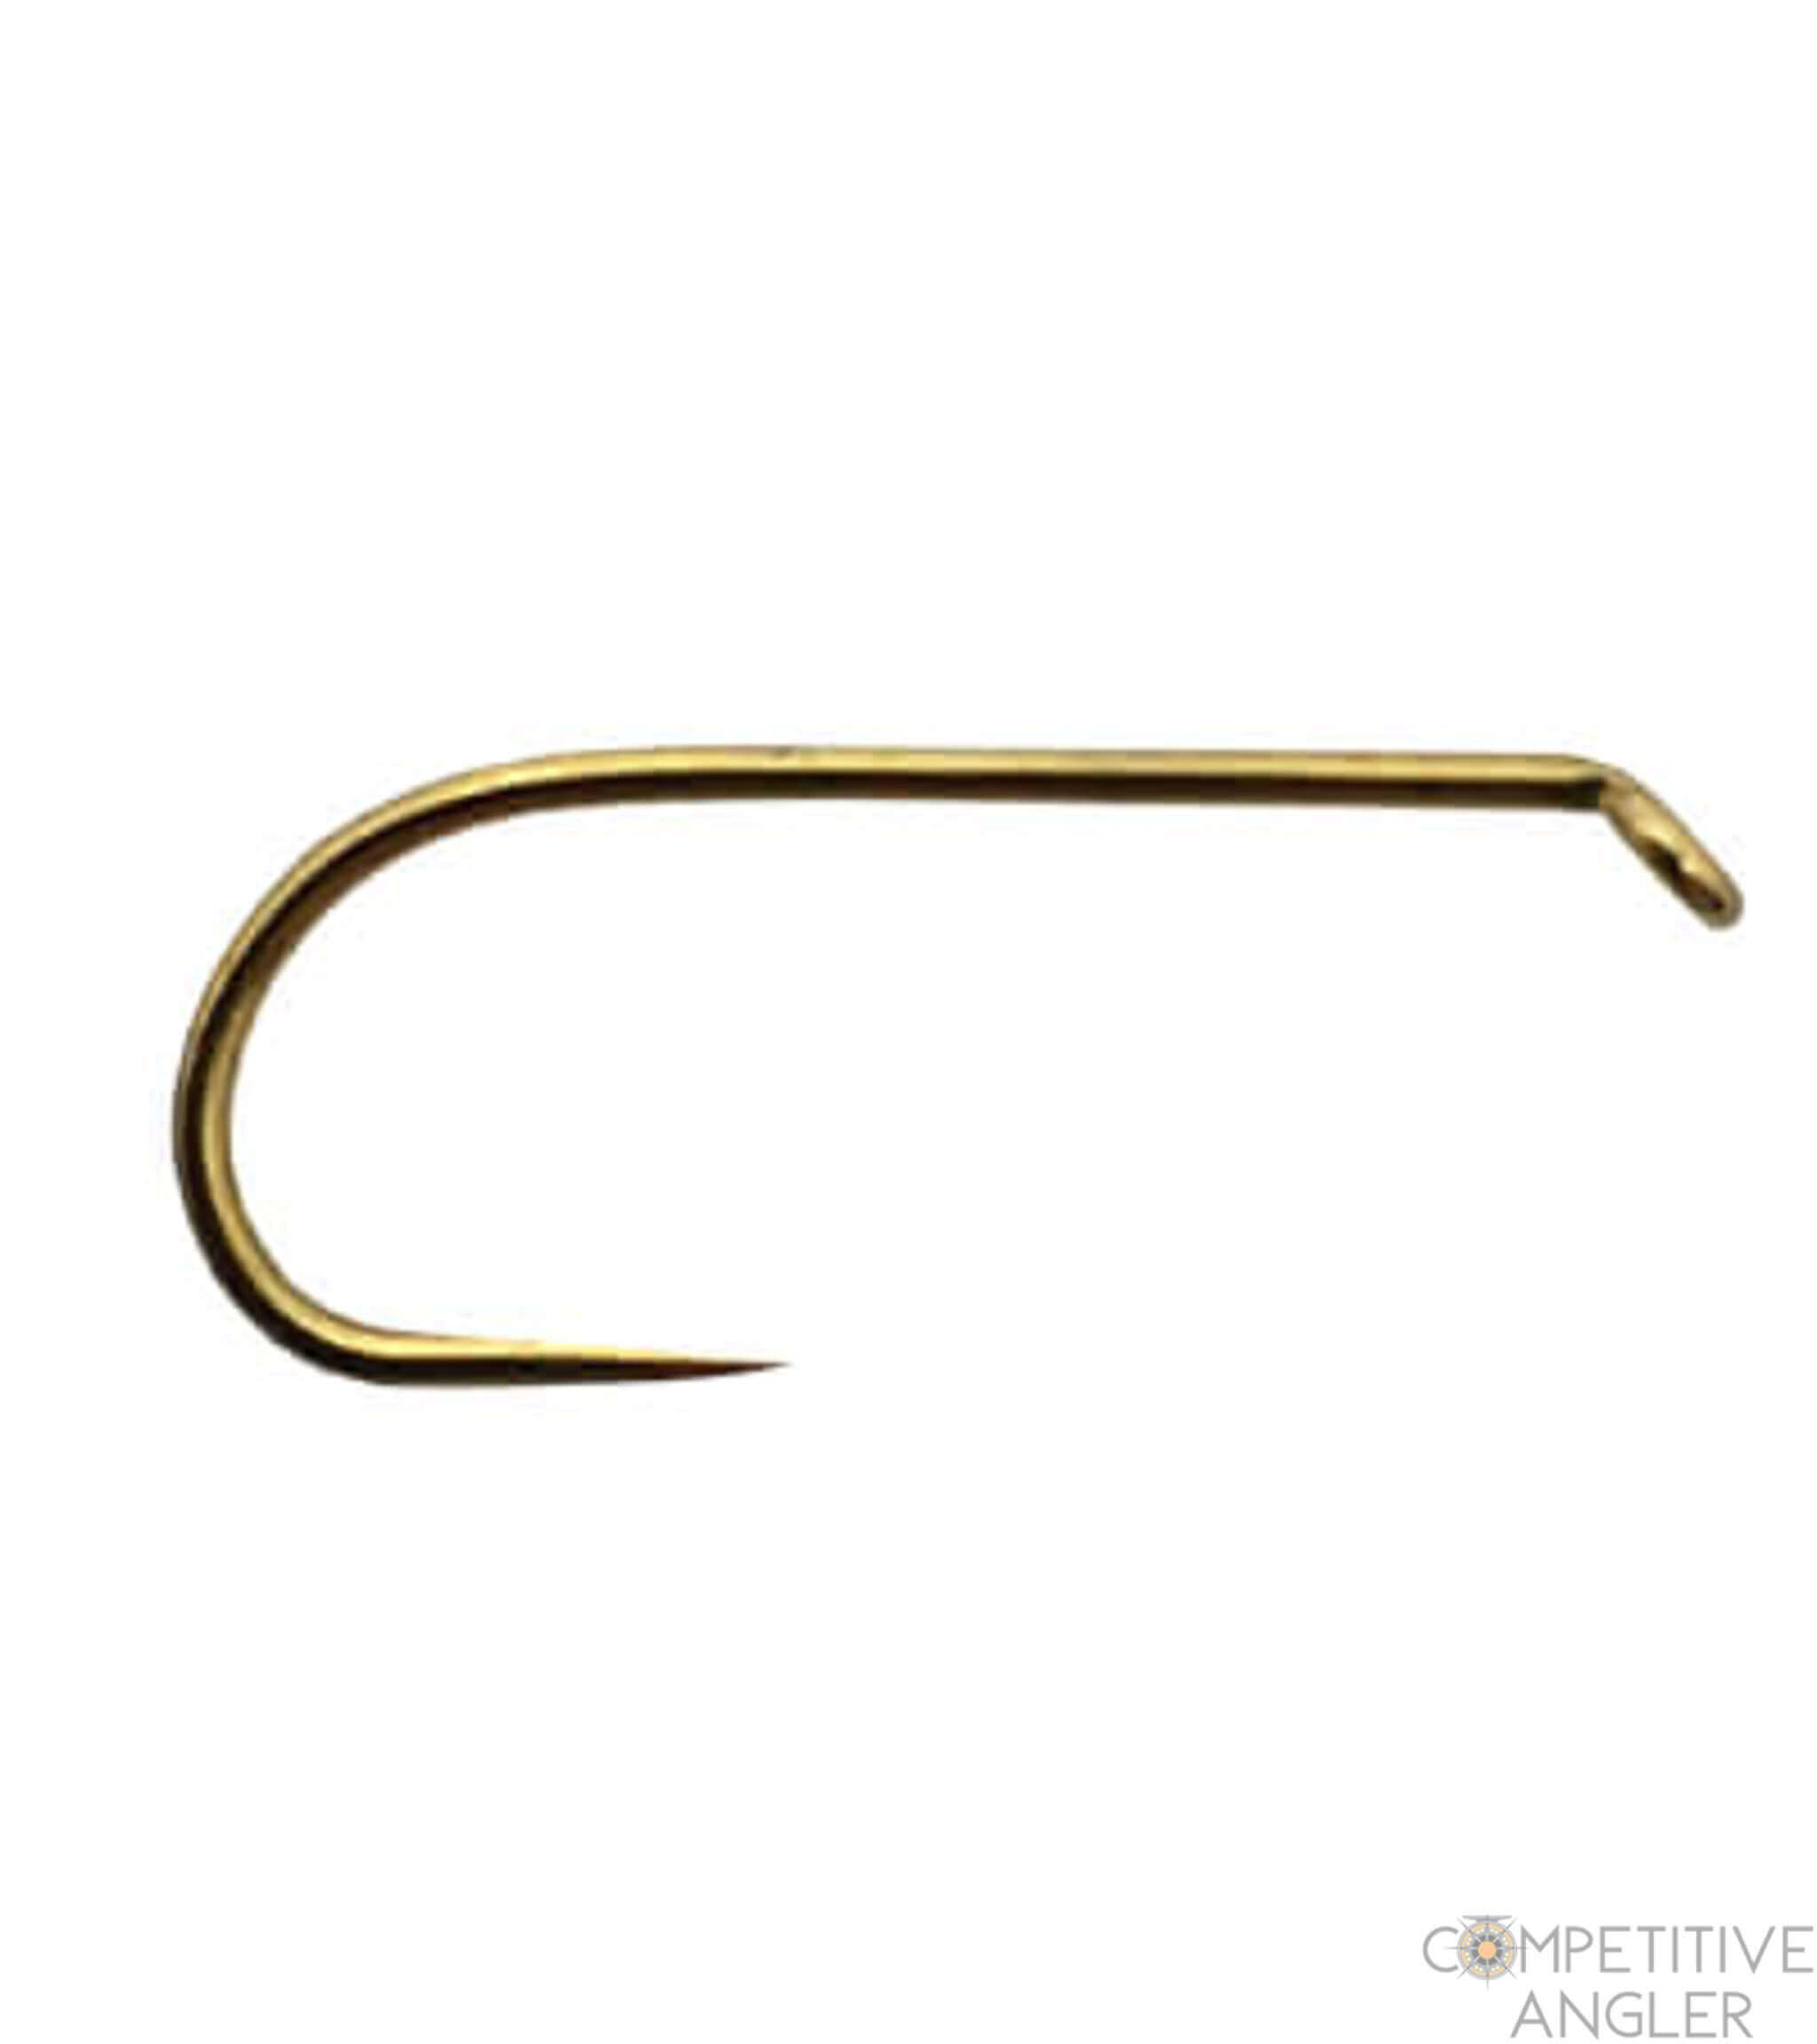 Daiichi 1190 Barbless Dry Fly Hook - Competitive Angler